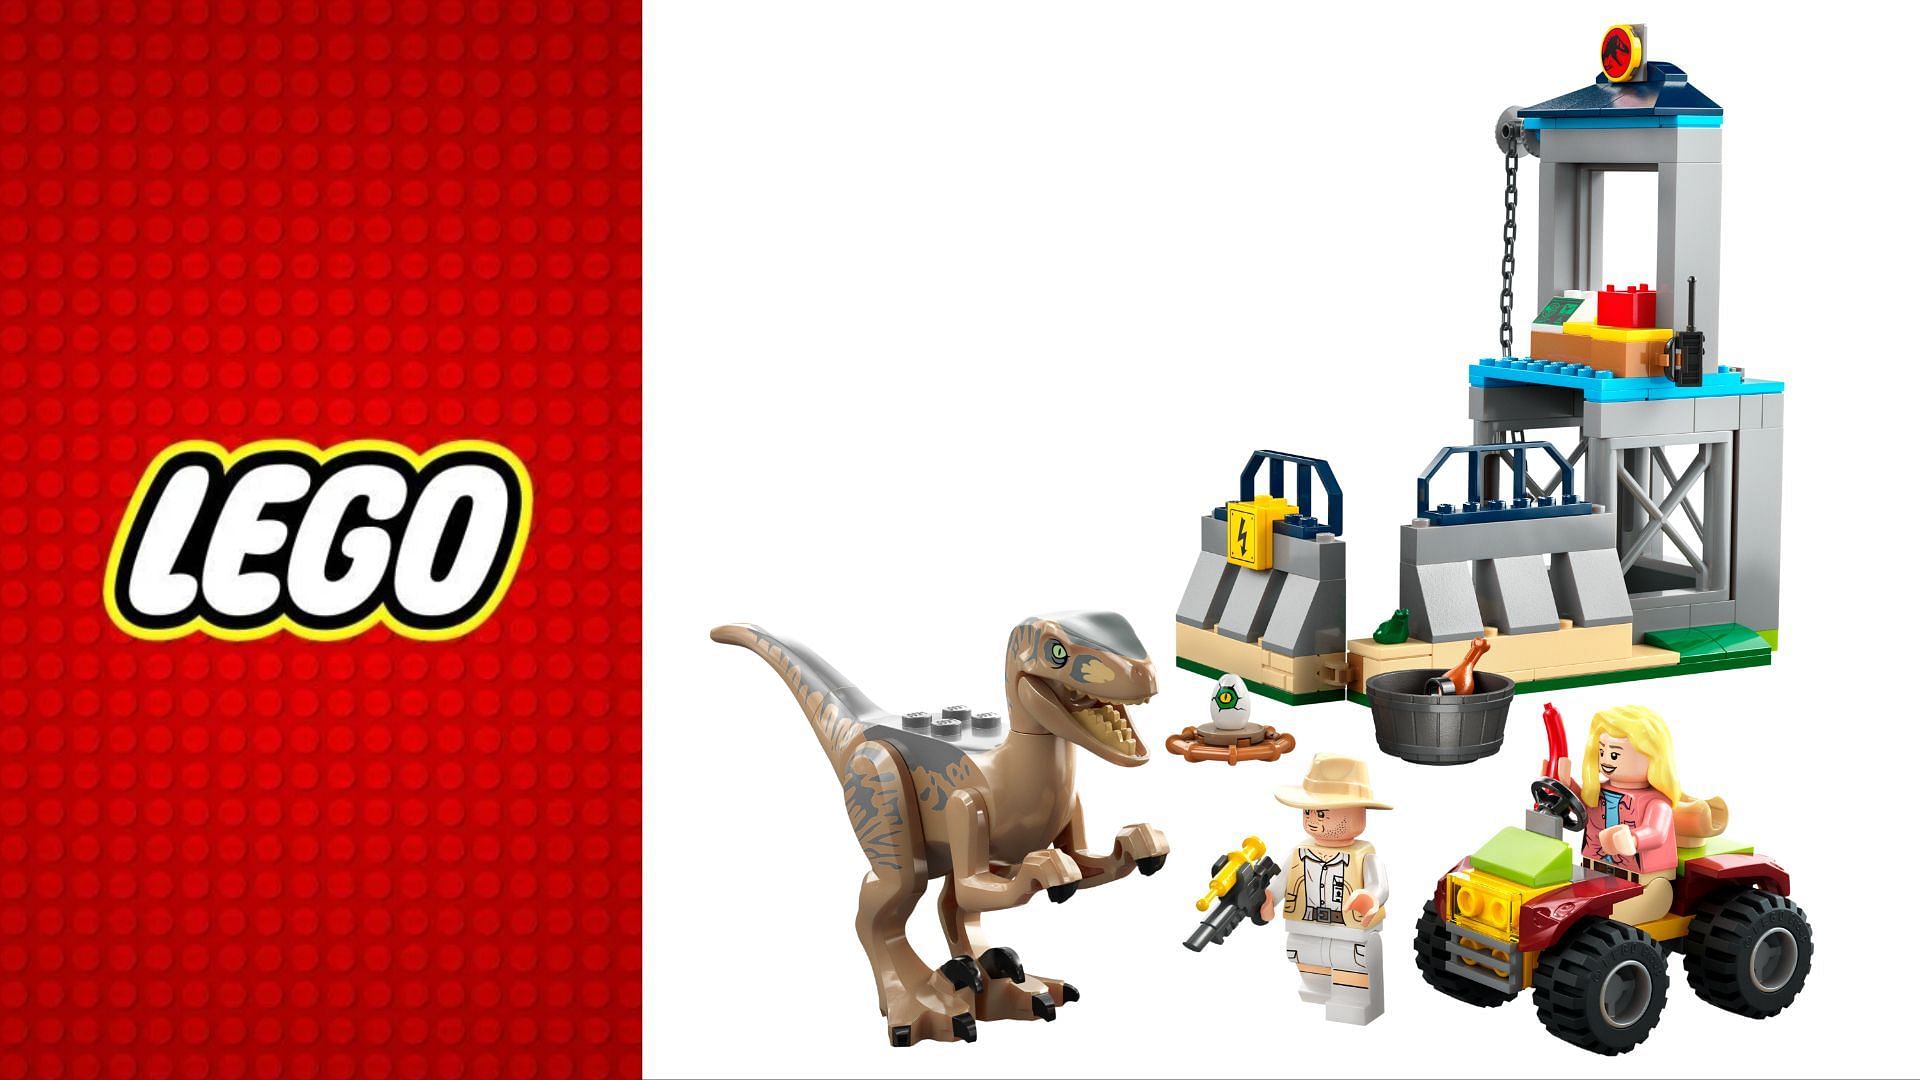 Lego introduces five new playsets for the 30th anniversary of the original Jurassic Park film (Image via Lego)